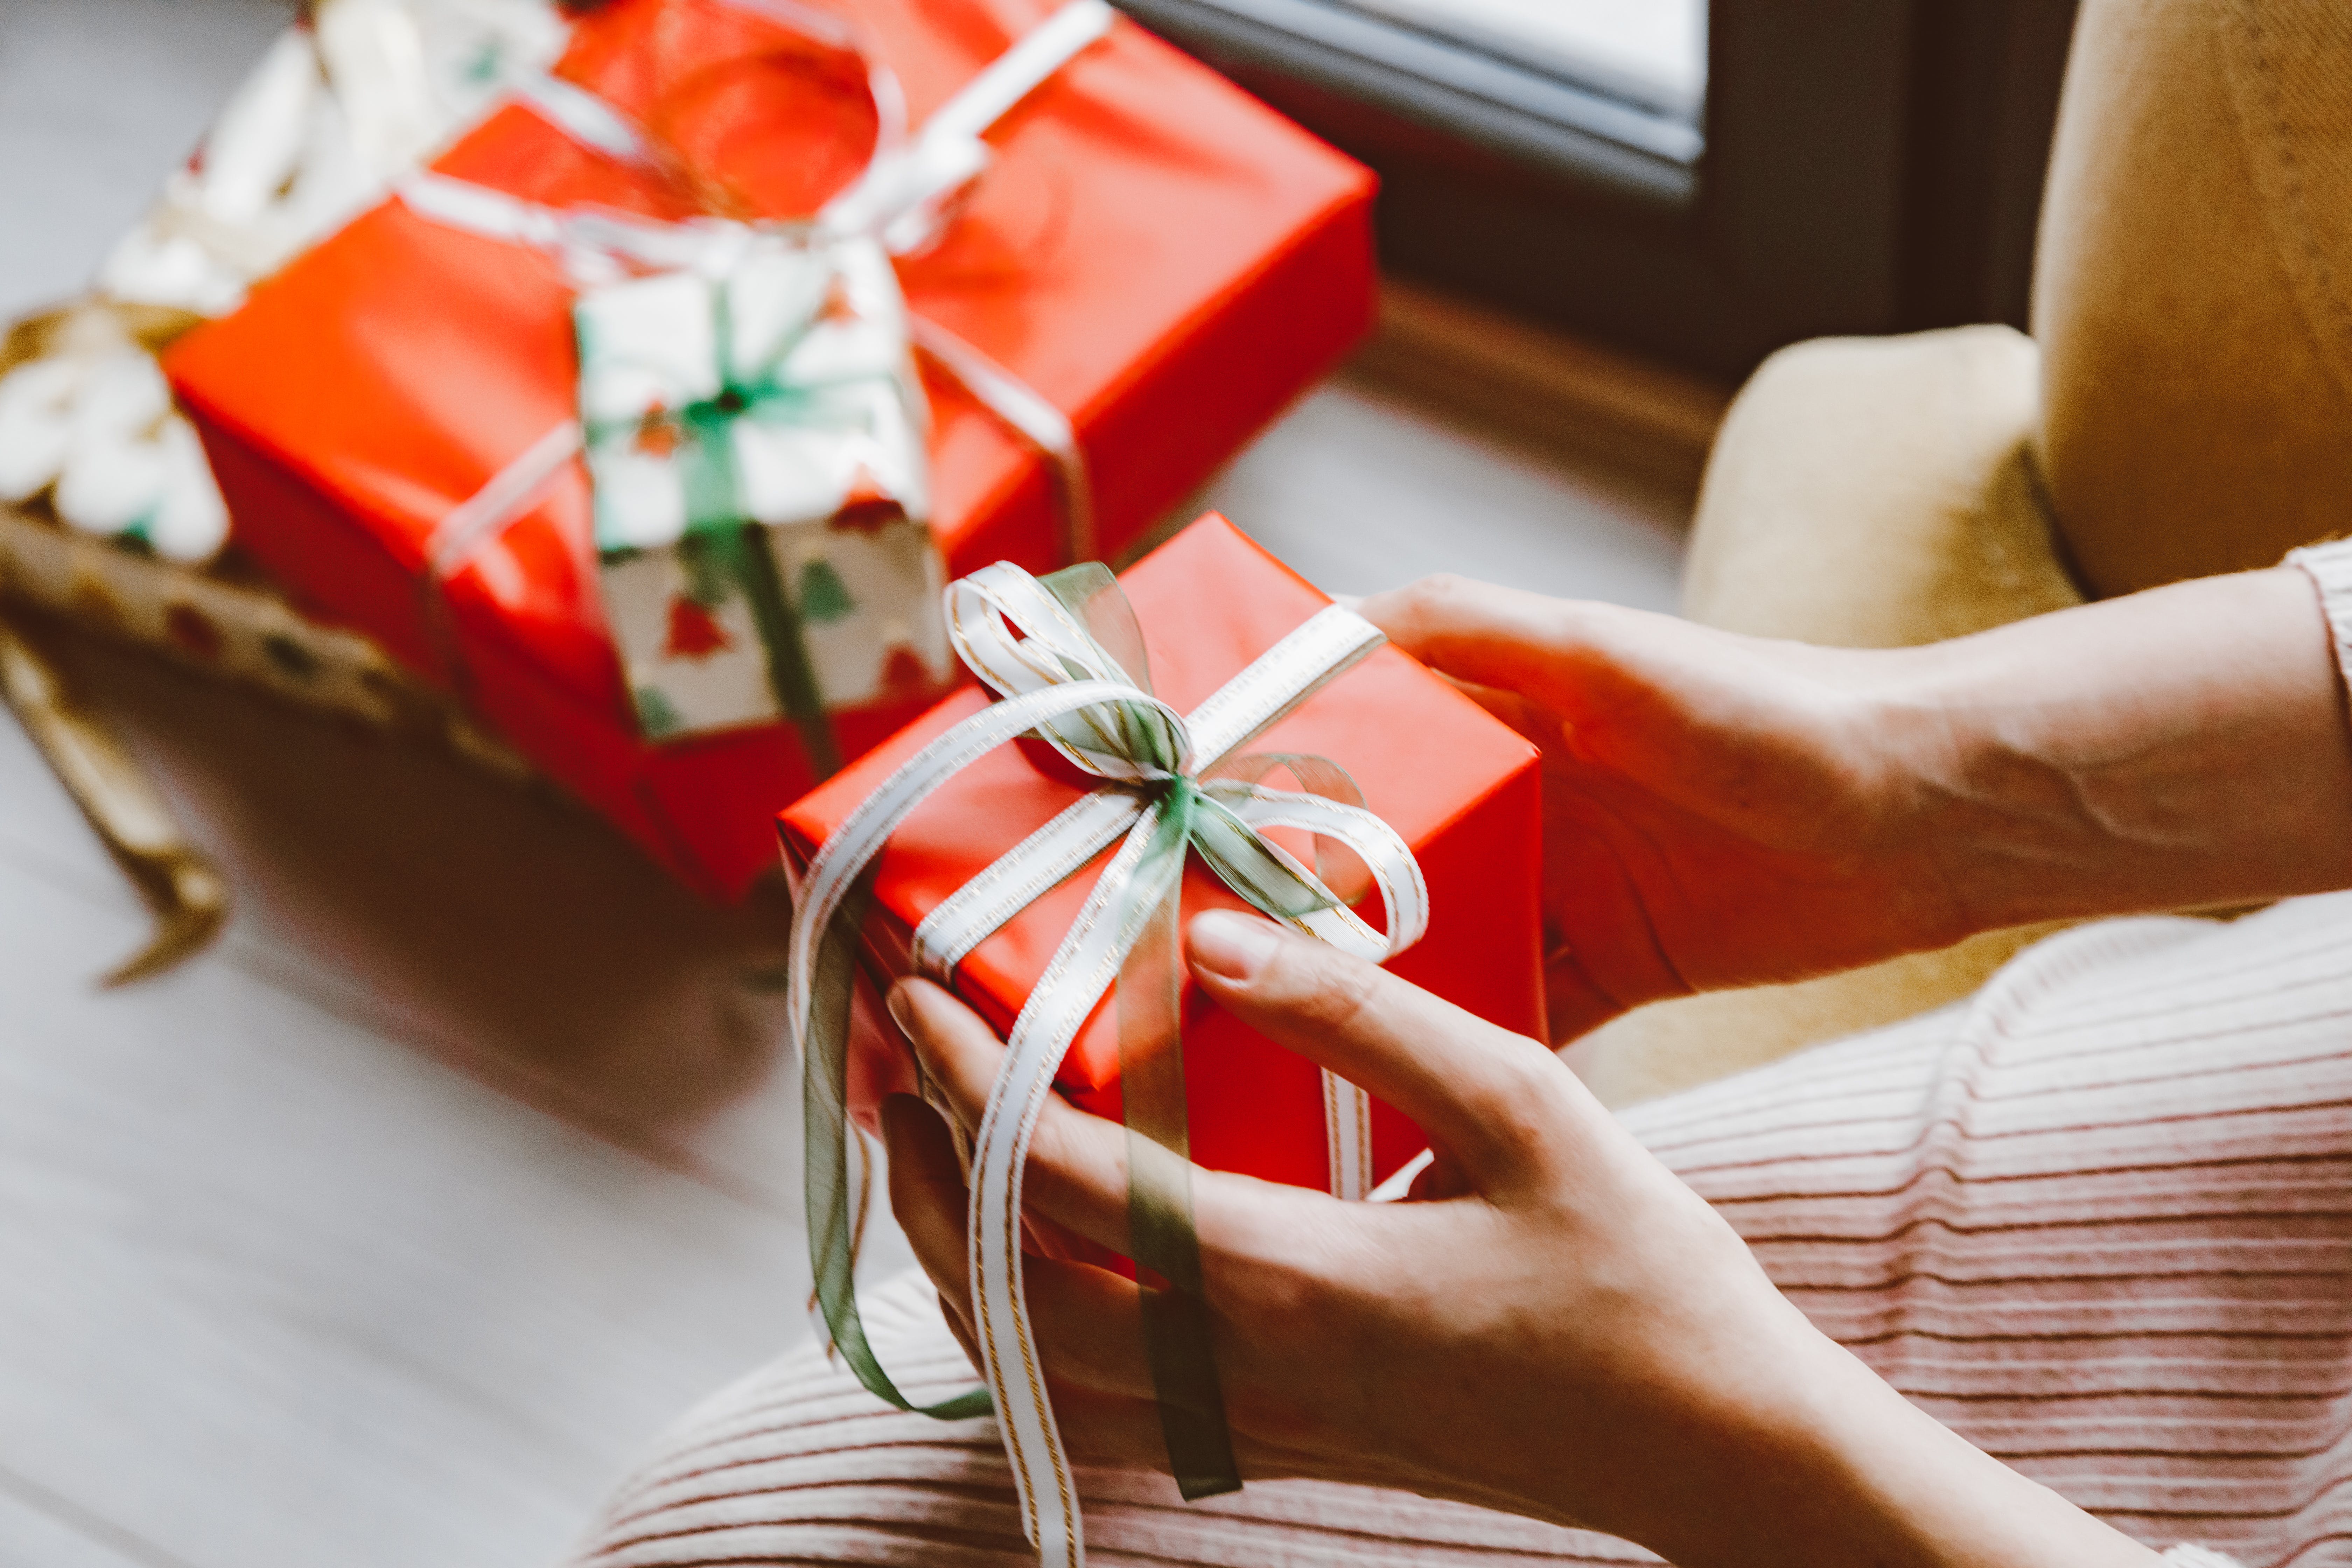 A person holding Christmas presents. | Source: Pexels